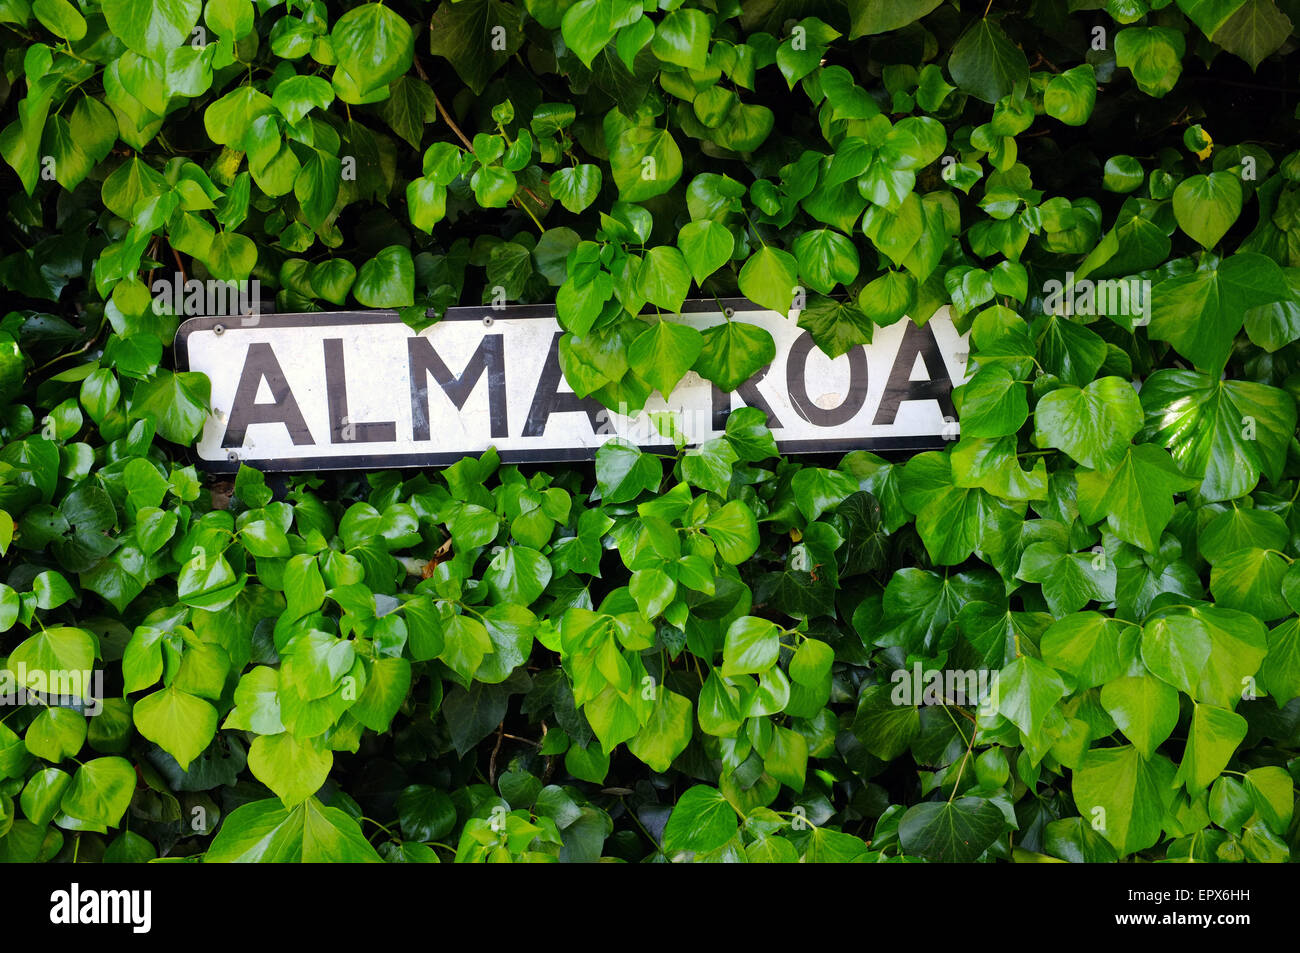 A road name sign heavily obscured by green foliage in Bristol. Stock Photo